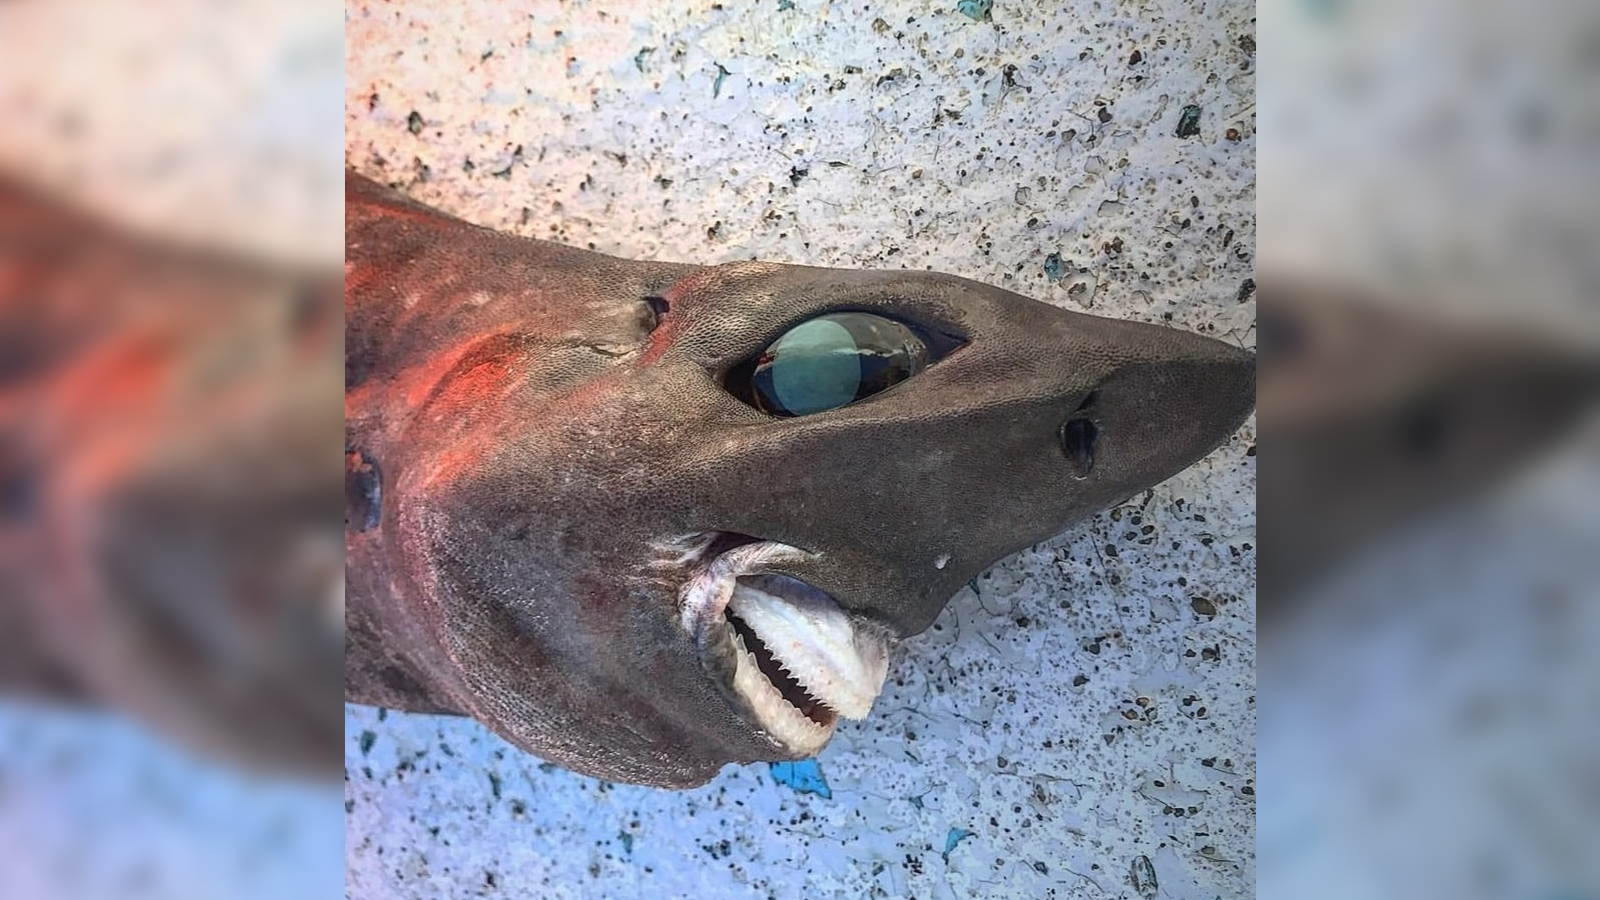 A close-up of the mysterious shark that was accidentally dragged up from the depths.